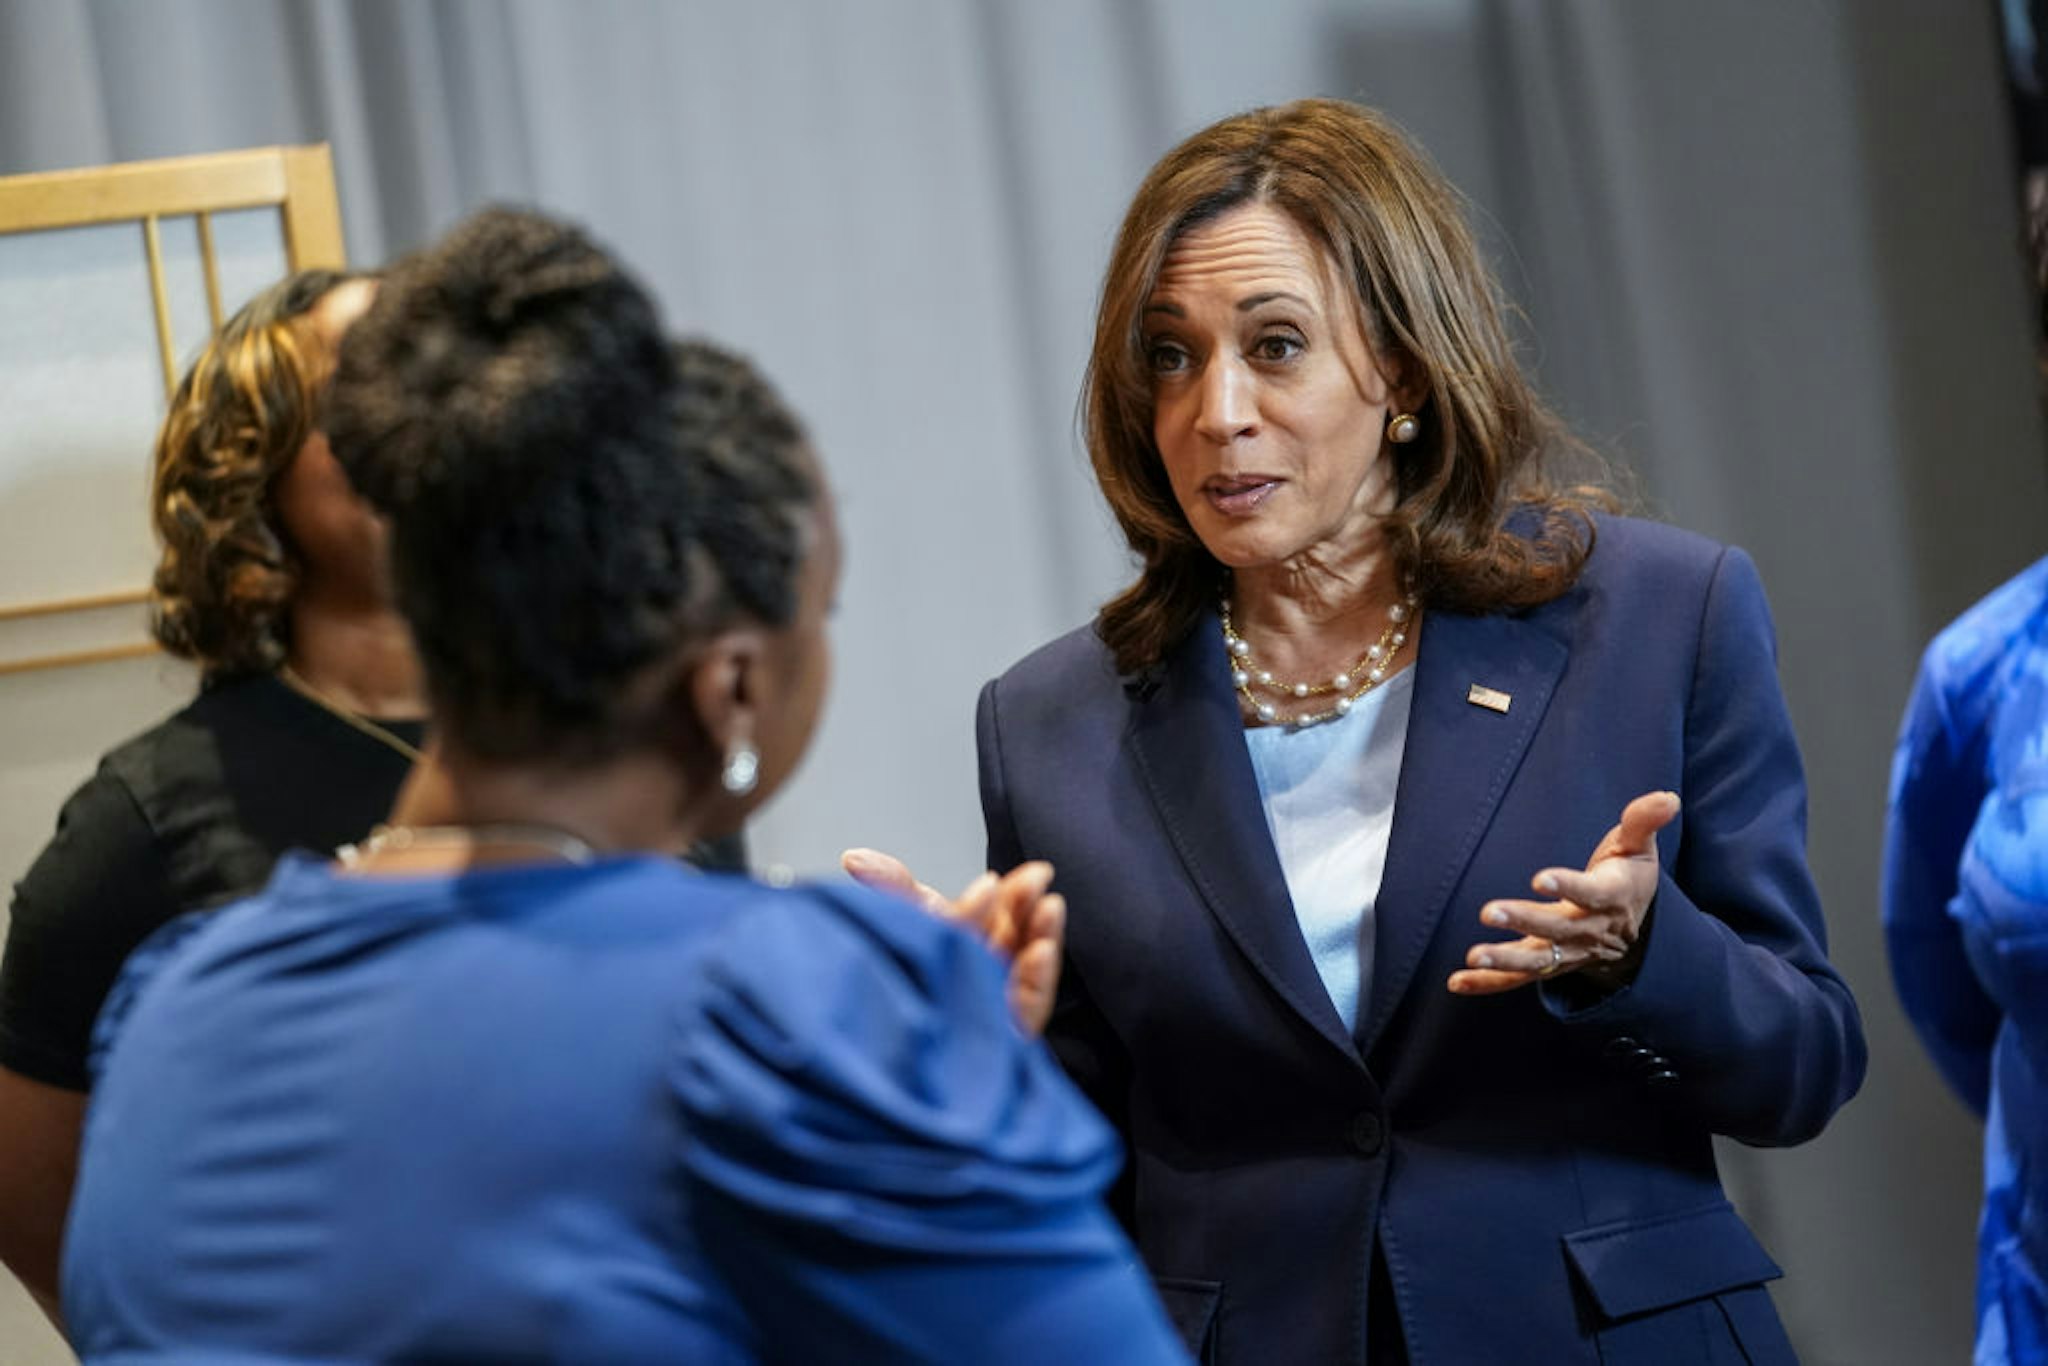 SAN FRANCISCO, CA - APRIL 21: Vice President Kamala Harris tours a facility at the University of California San Francisco Mission Bay for an event on Black Maternal Health on April 21, 2022 in San Francisco, CA.